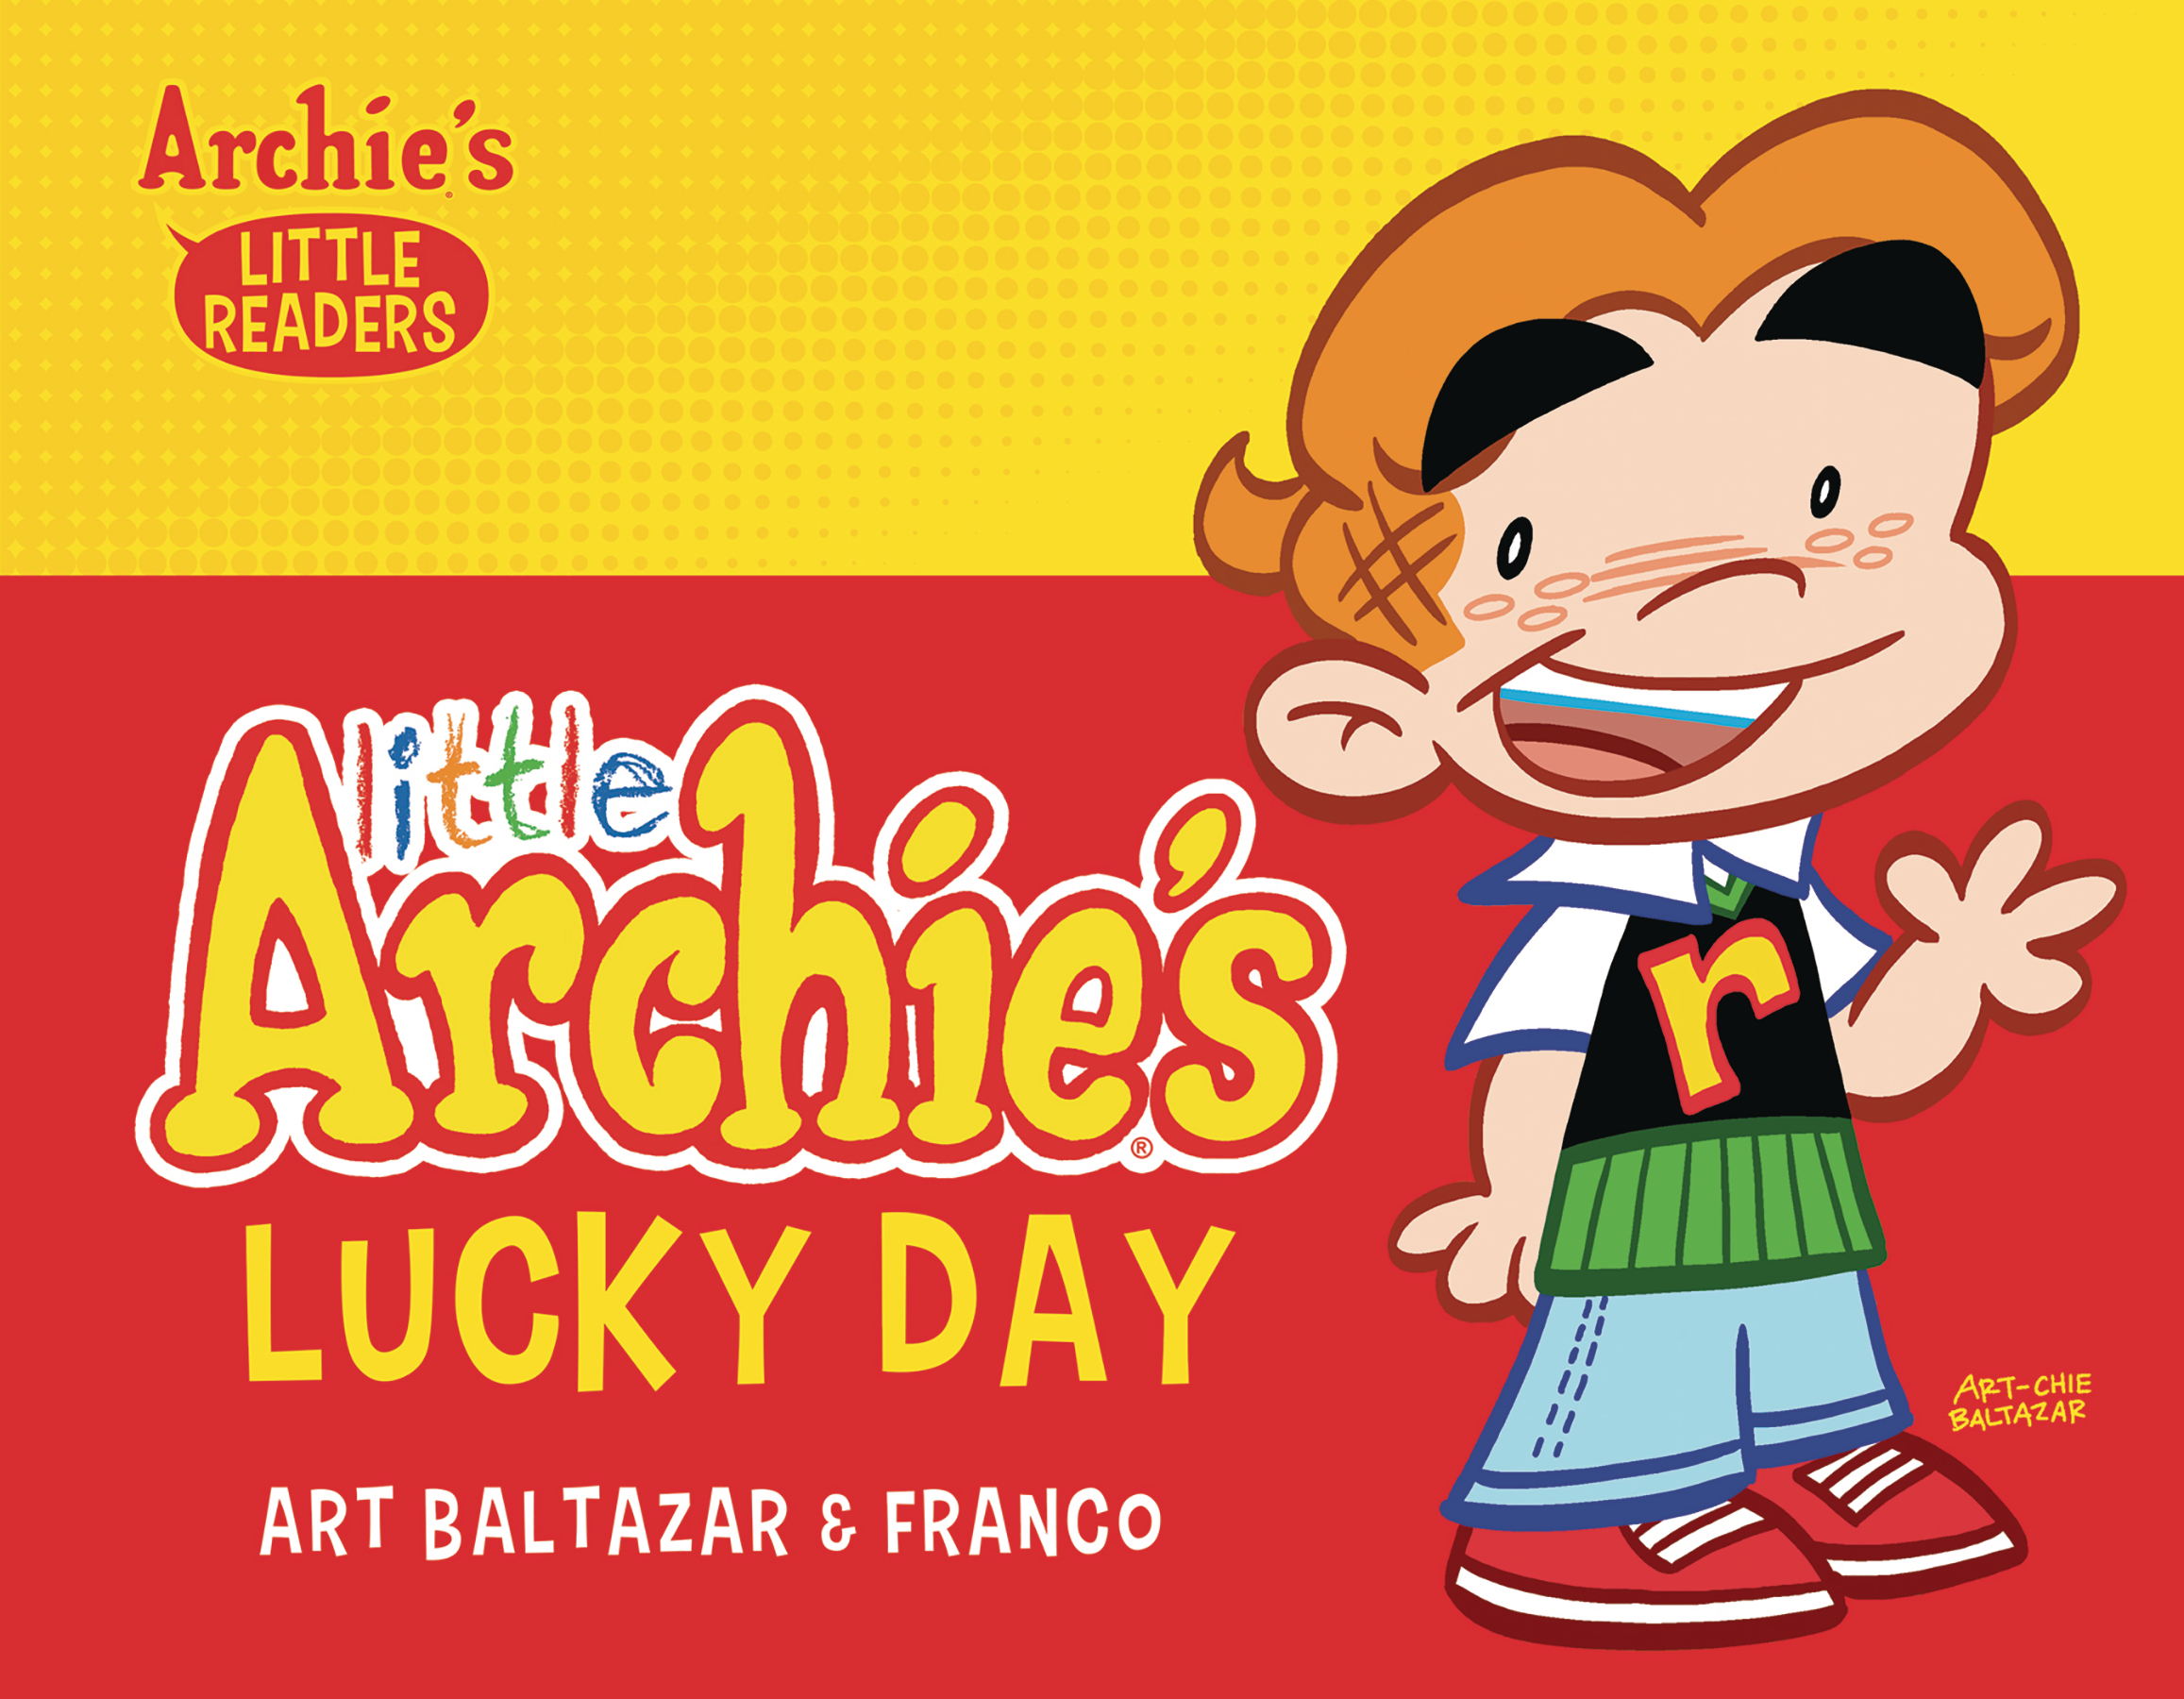 Little Archies Lucky Day Picture Book Hardcover (Mature)